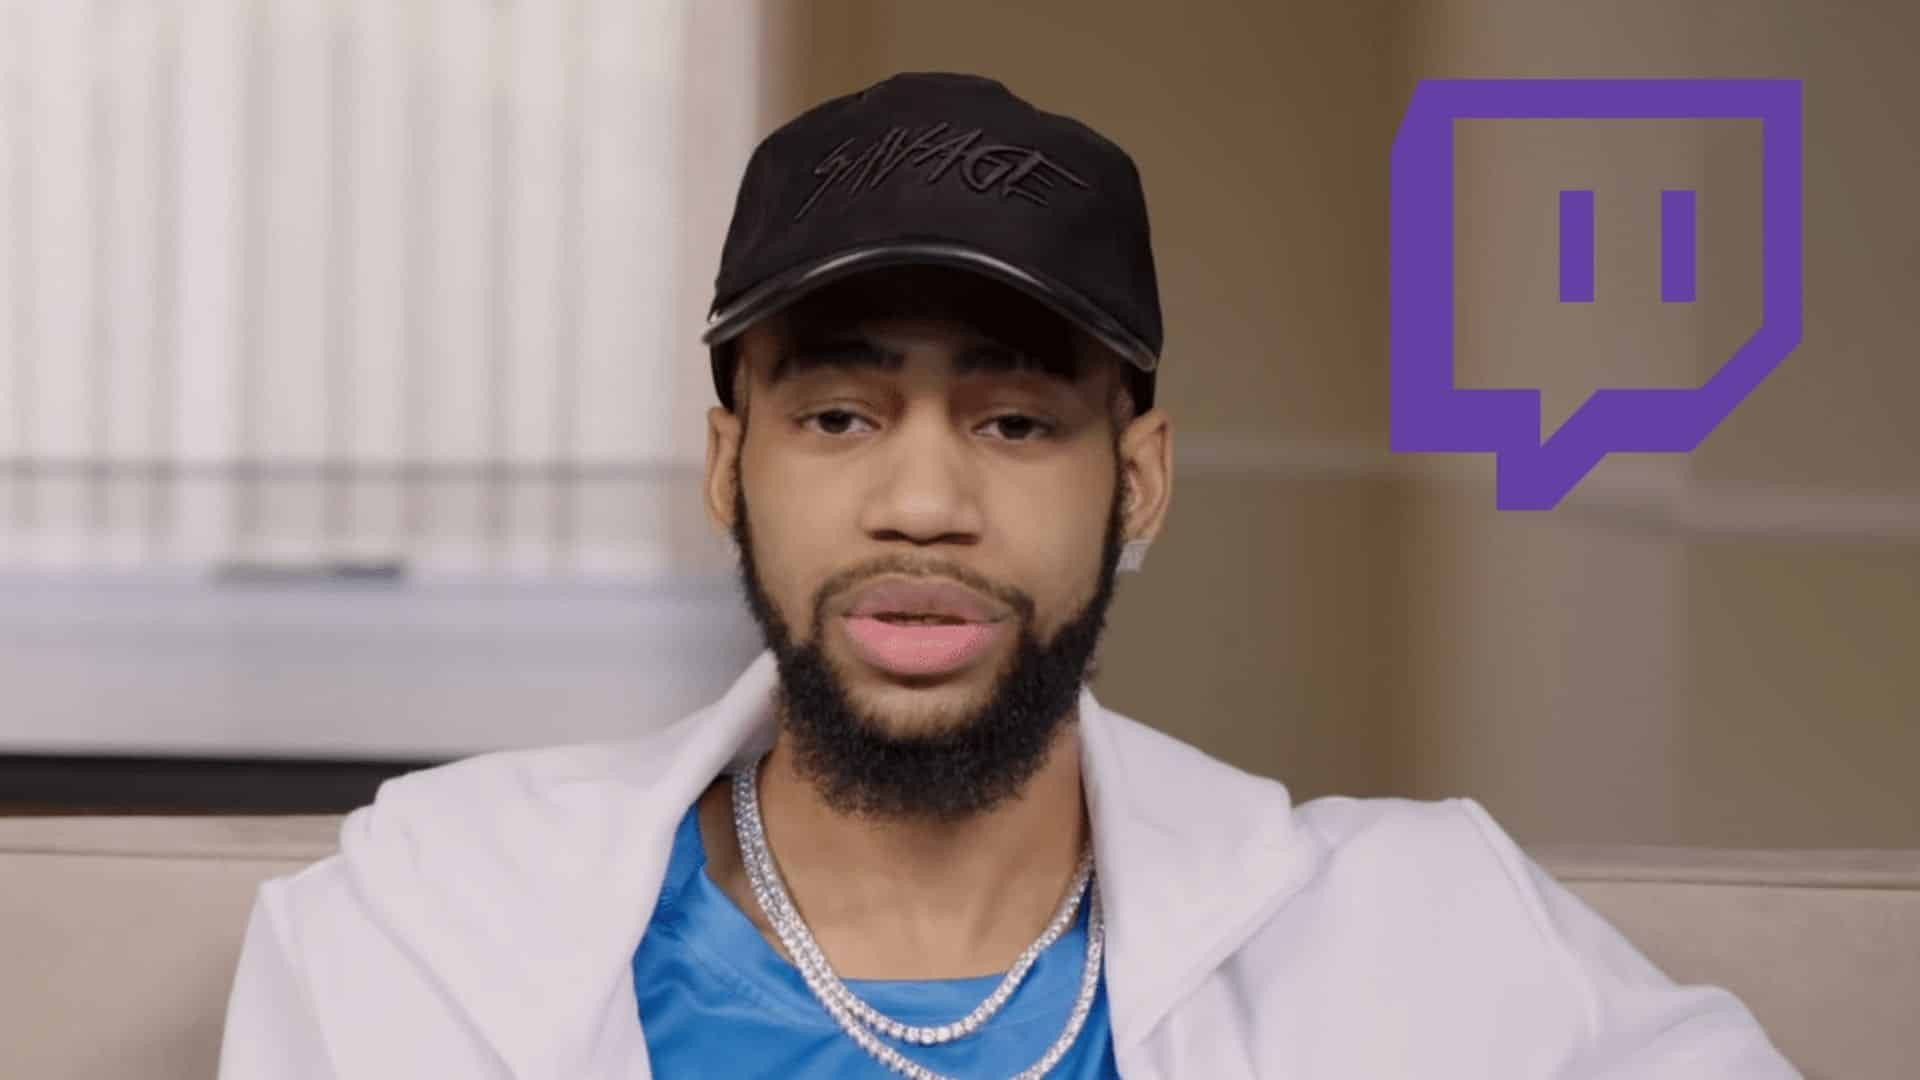 Daequan talking to camera with Twitch logo